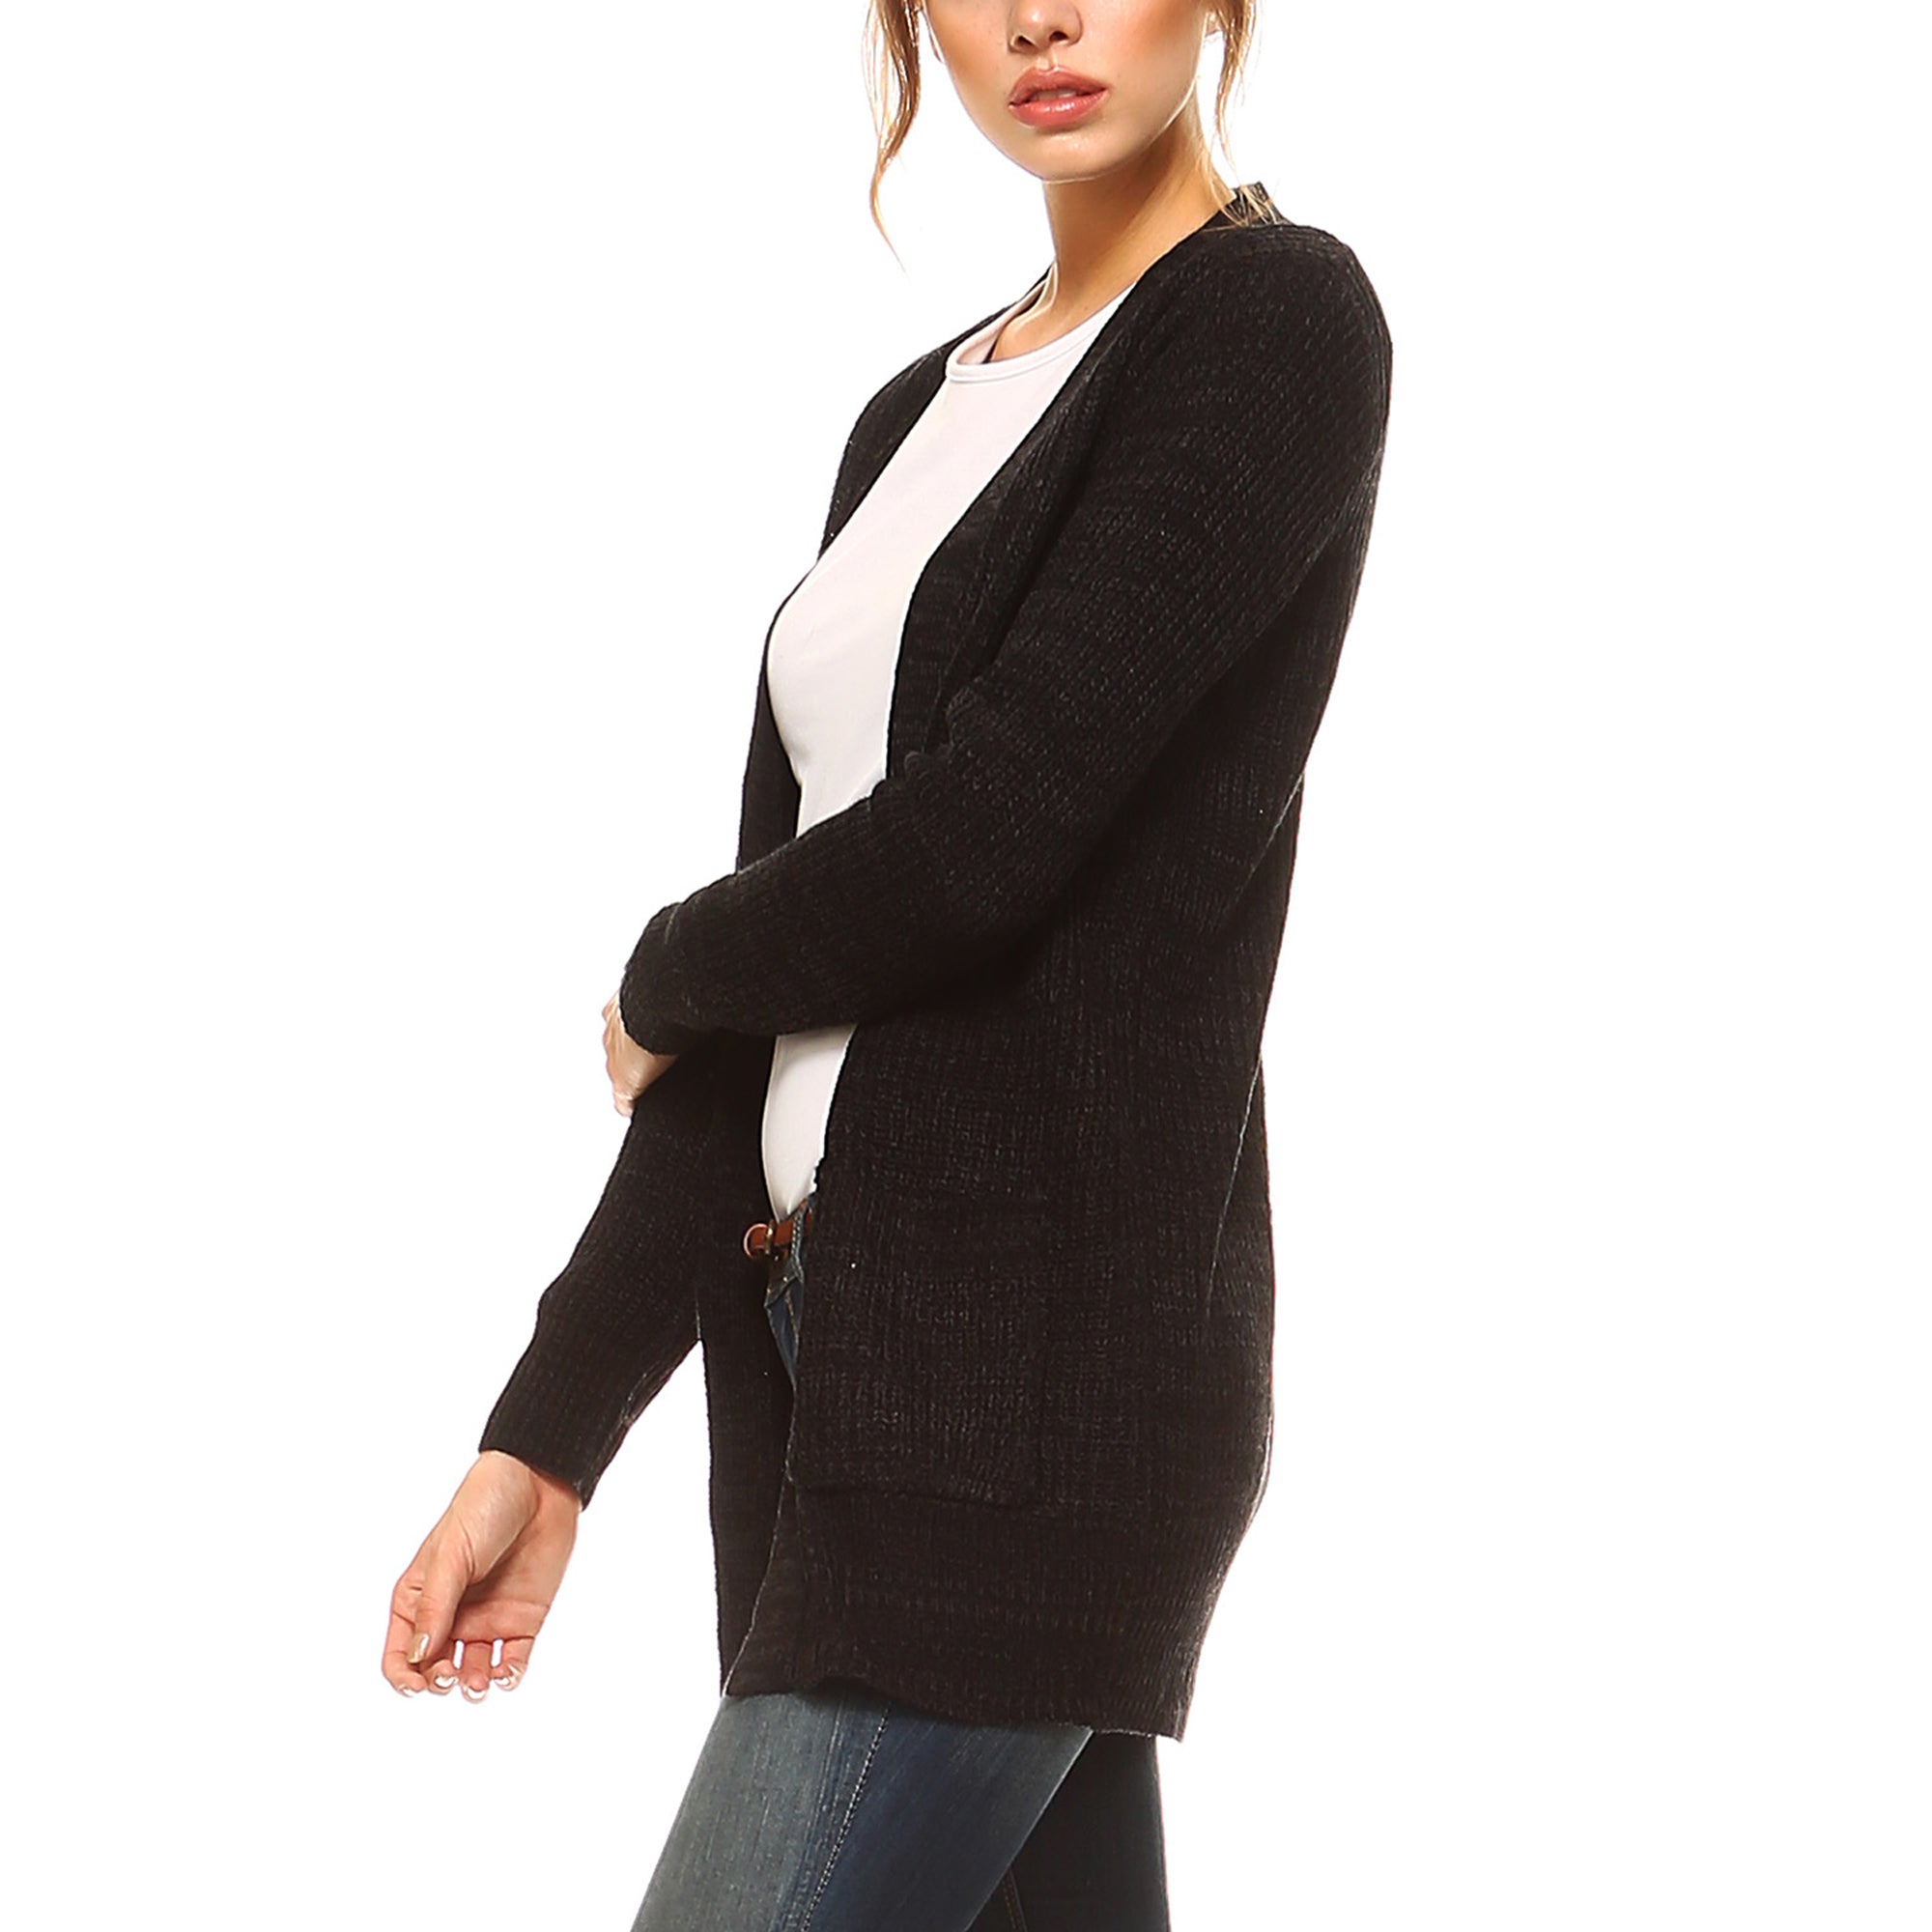 Fashionazzle Women's Casual Open Front Knit Sweater Cardigan with Pocket